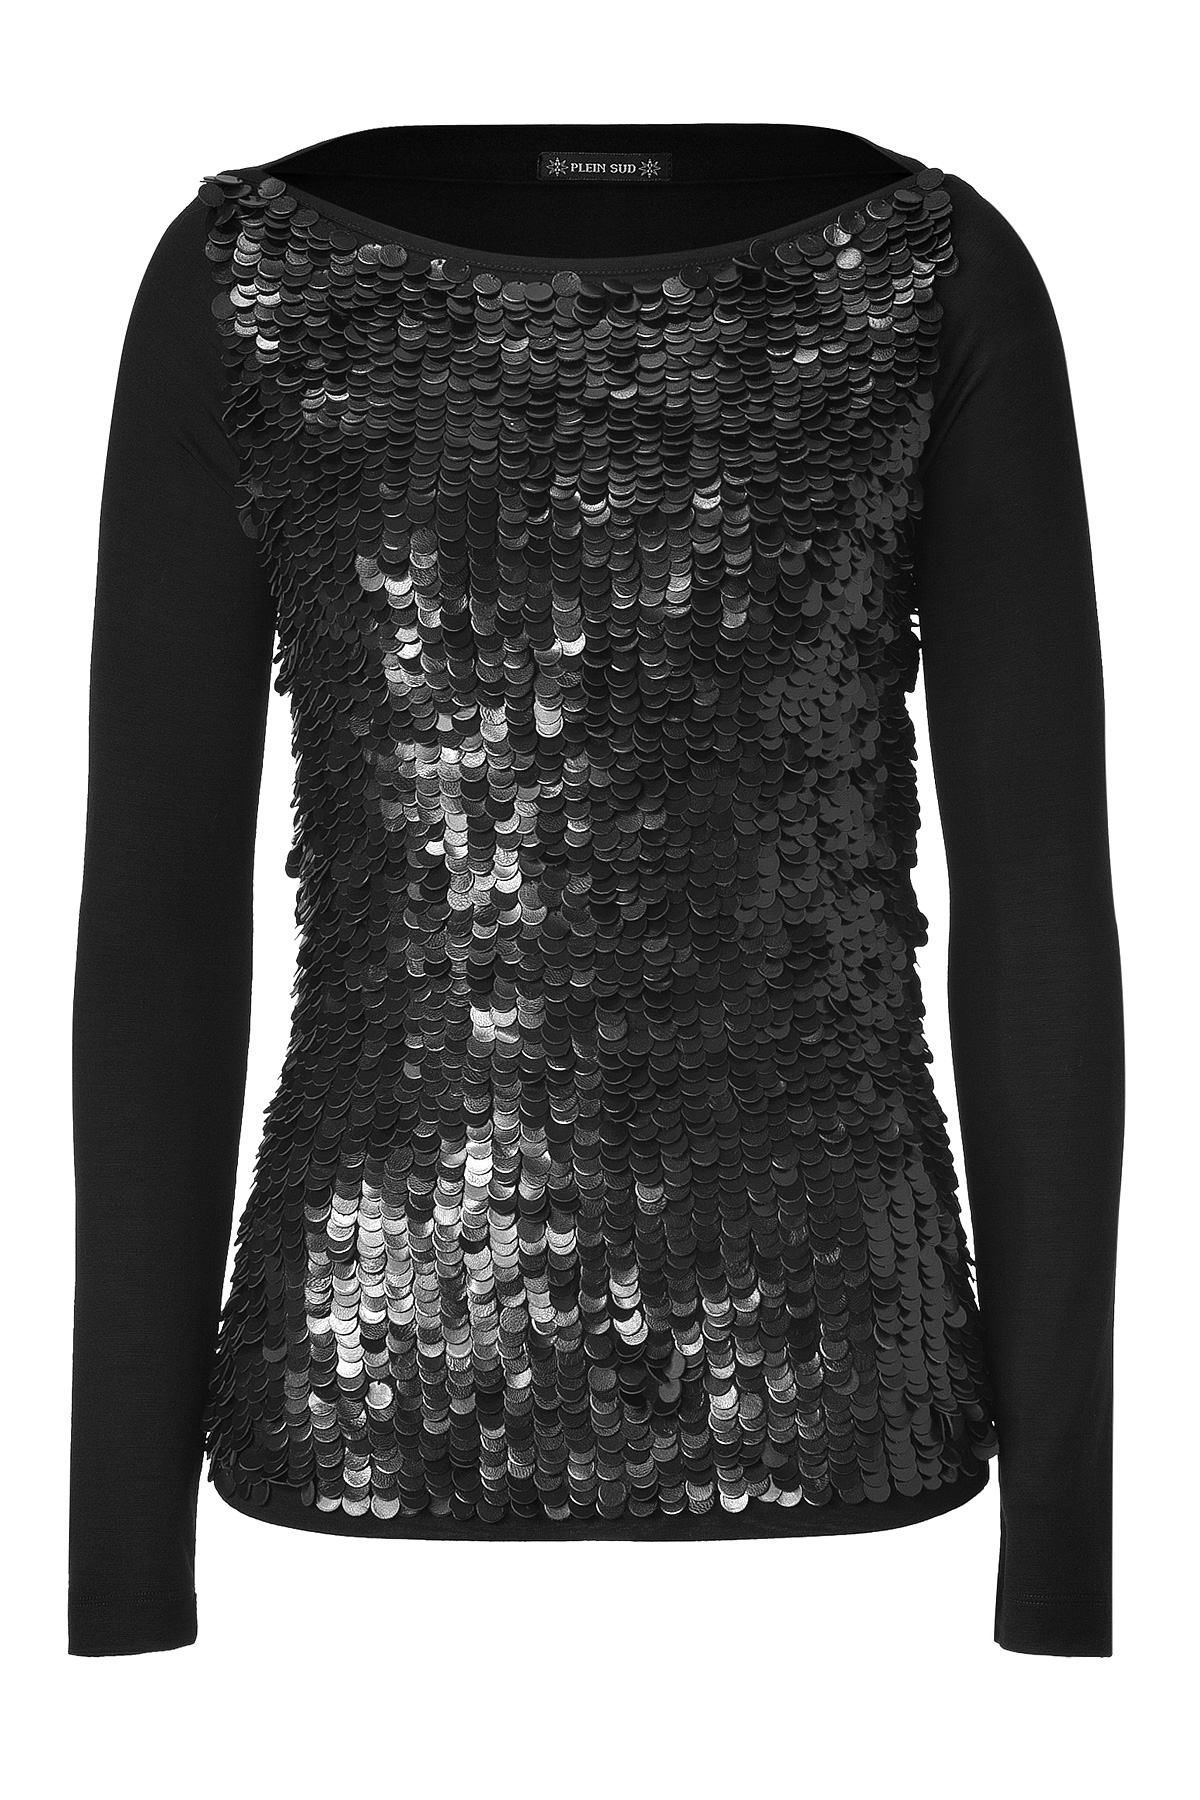 Plein Sud Black Leather Sequined Stretch Wool Long Sleeve Top in Black ...